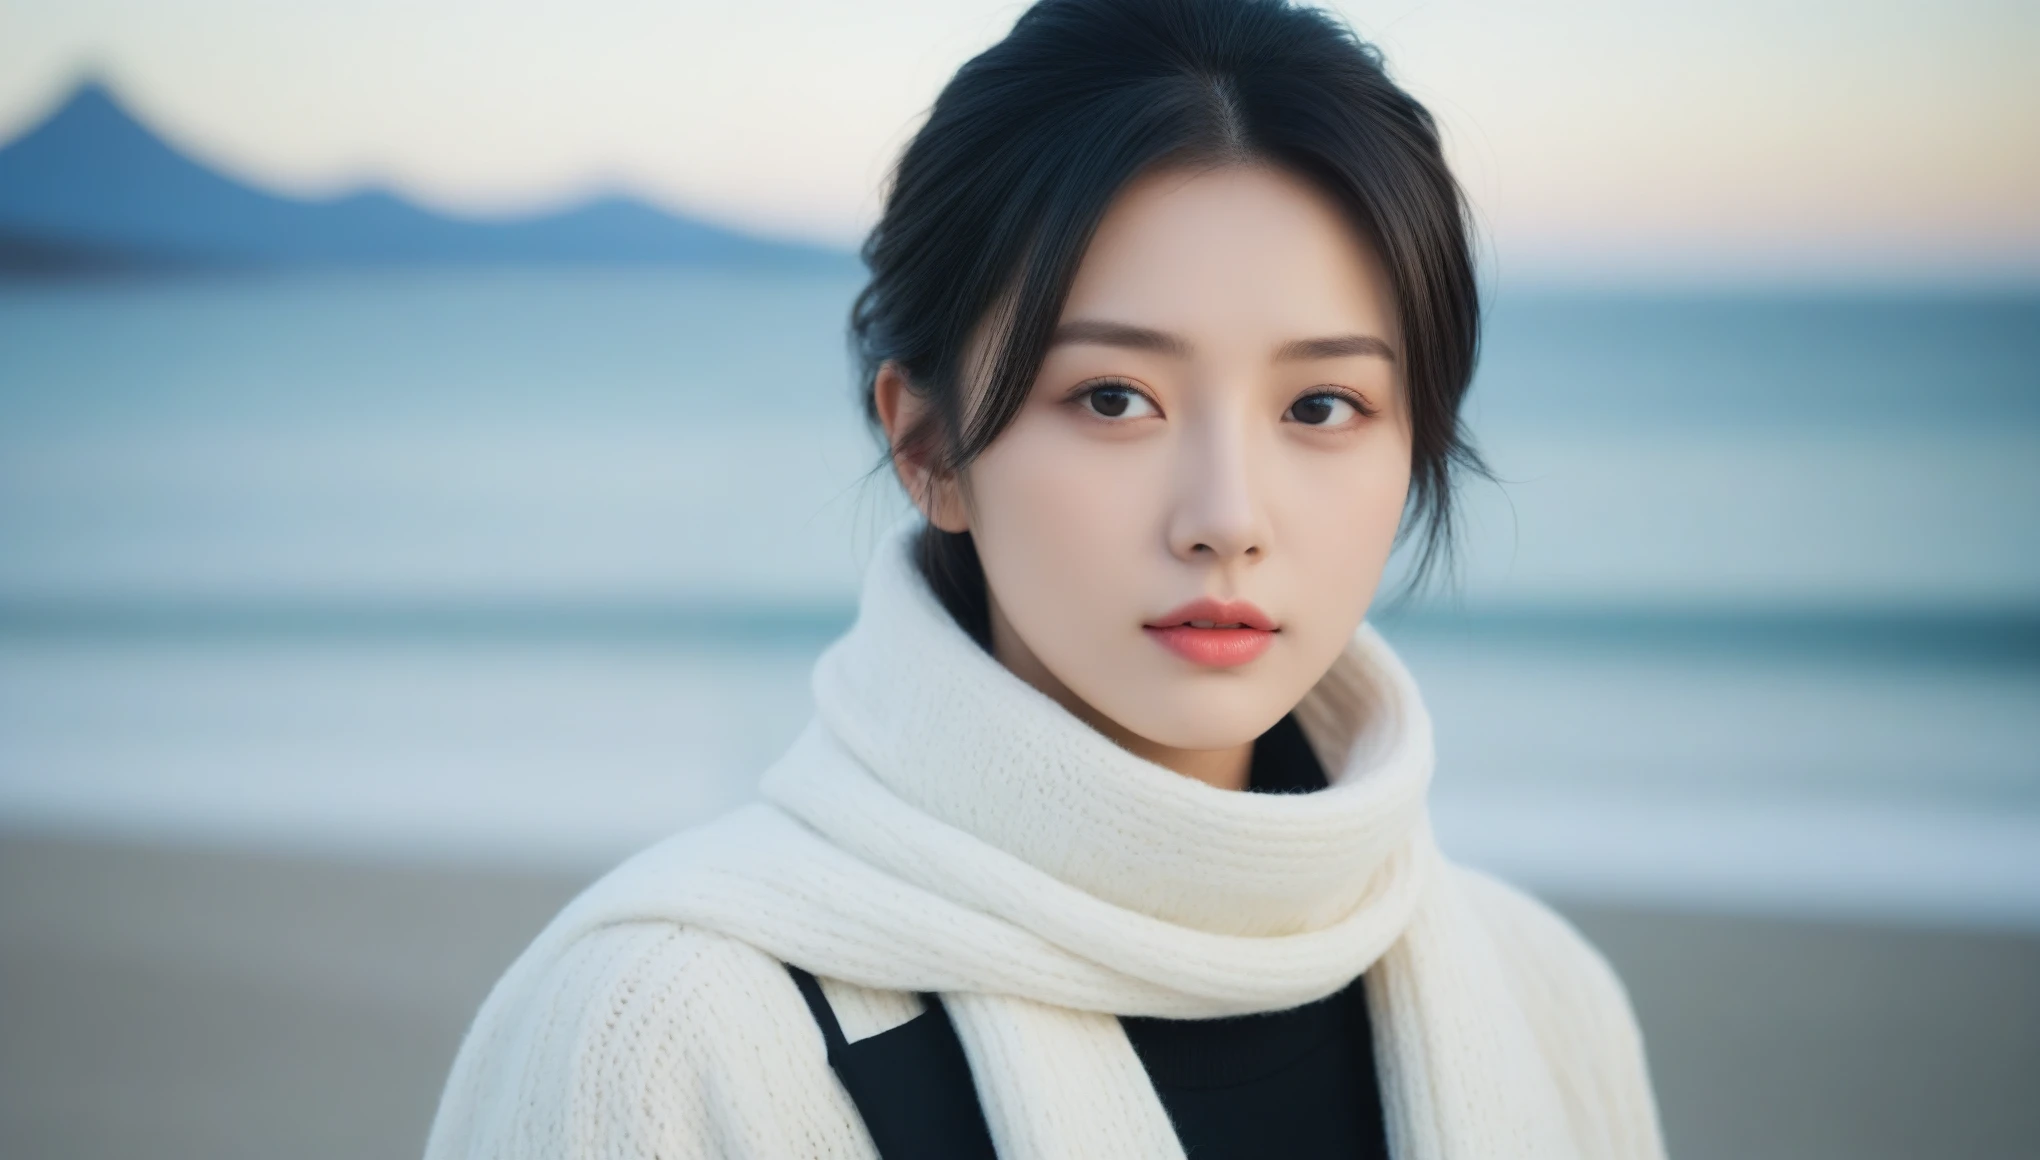 8K, 超High resolution, highest quality, masterpiece, Surreal, photograph,Three-part method, 1 girl, (16 years old:1.3), pretty girl, Cute face, Beautiful eyes in every detail,Japan Female Announcer,(wearing a long winter coat and scarf、Close-up of thin black two-sided updo:1.5)、(The girl turns around with a very sad look on her face, Her hair fluttering in the wind on the winter beach:1.5)、(Blurred Background:1.5)、(red sky at sunset:1.5)、(Perfect Anatomy:1.5)、(Complete Hand:1.3)、(Full Finger:1.3)、Photorealistic、生photograph、Tabletop、highest quality、High resolution、Delicate and beautiful、Perfect Face、Beautiful fine details、Fair skin、Real human skin、((Thin legs))、Bold Pose,super cute super model、Please look closely at the camera 、Vivid details、detailed、Surreal、Light and shadow,Strong light,Fashion magazine cover,Thin lips